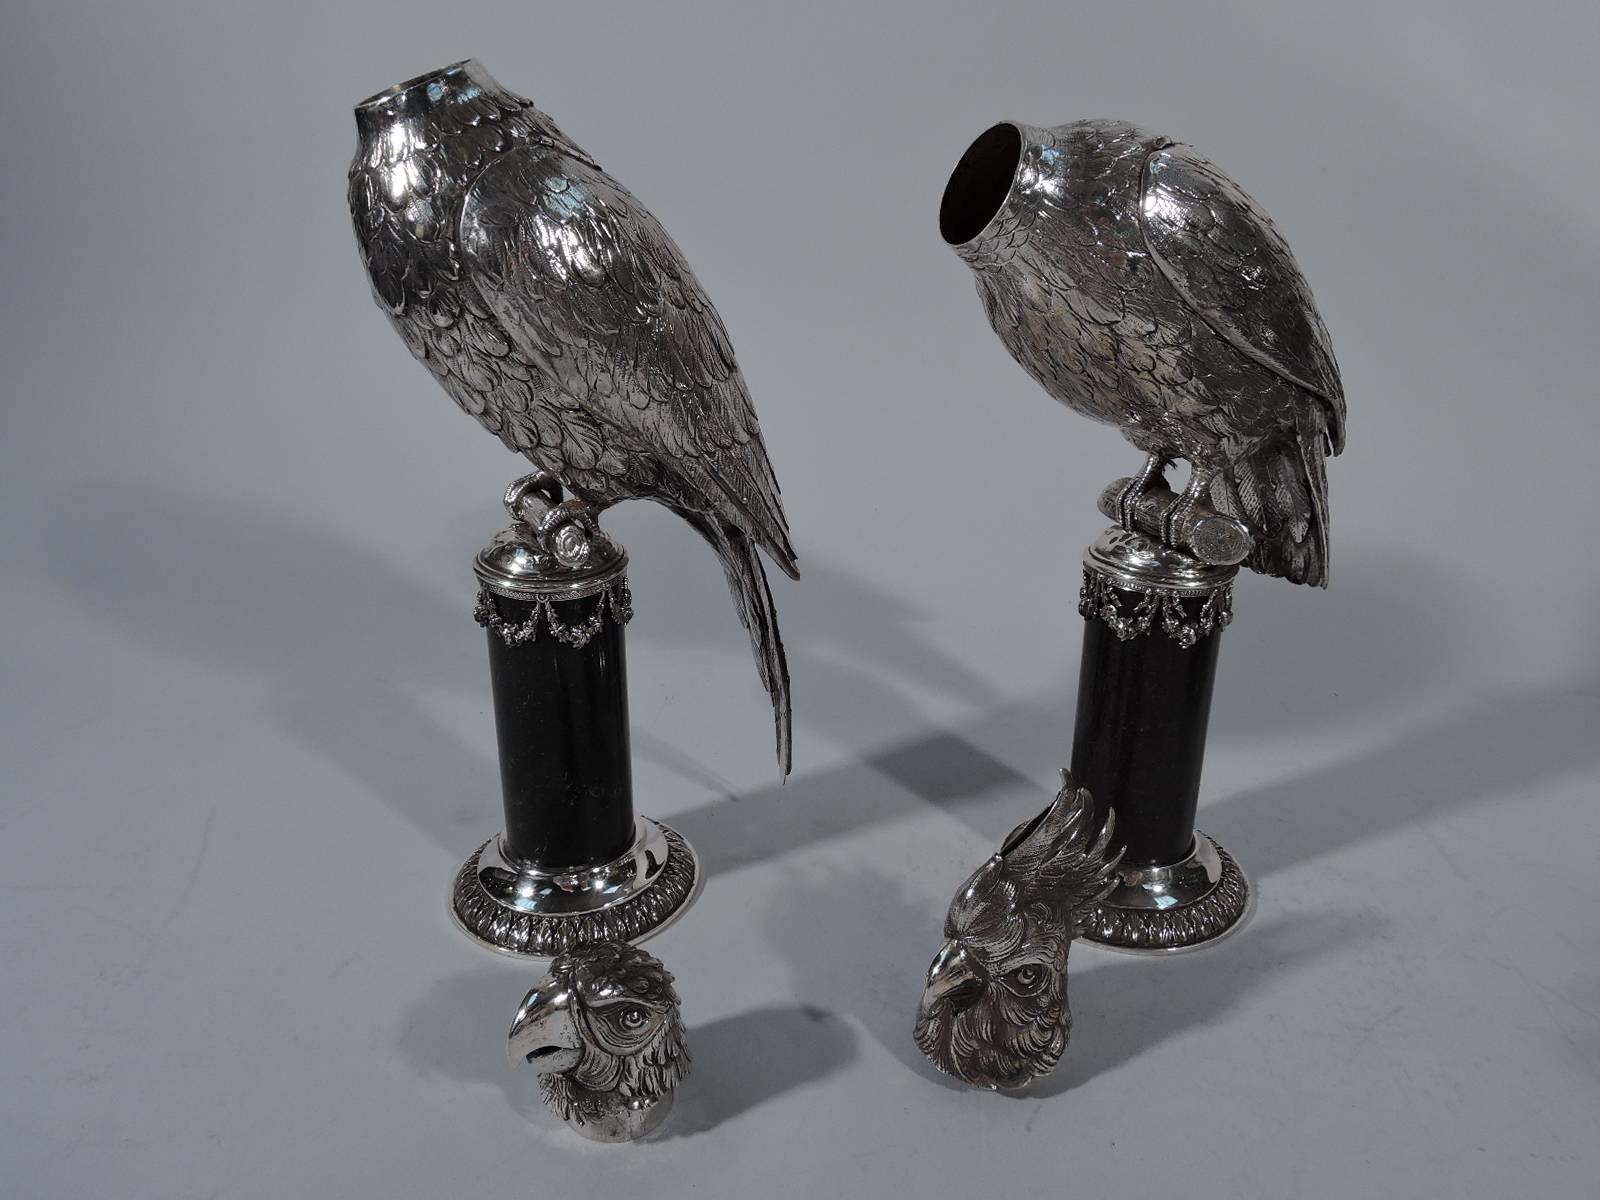 Antique German Silver Parrot Spice Boxes, a Pair of Pretty Pollies 4